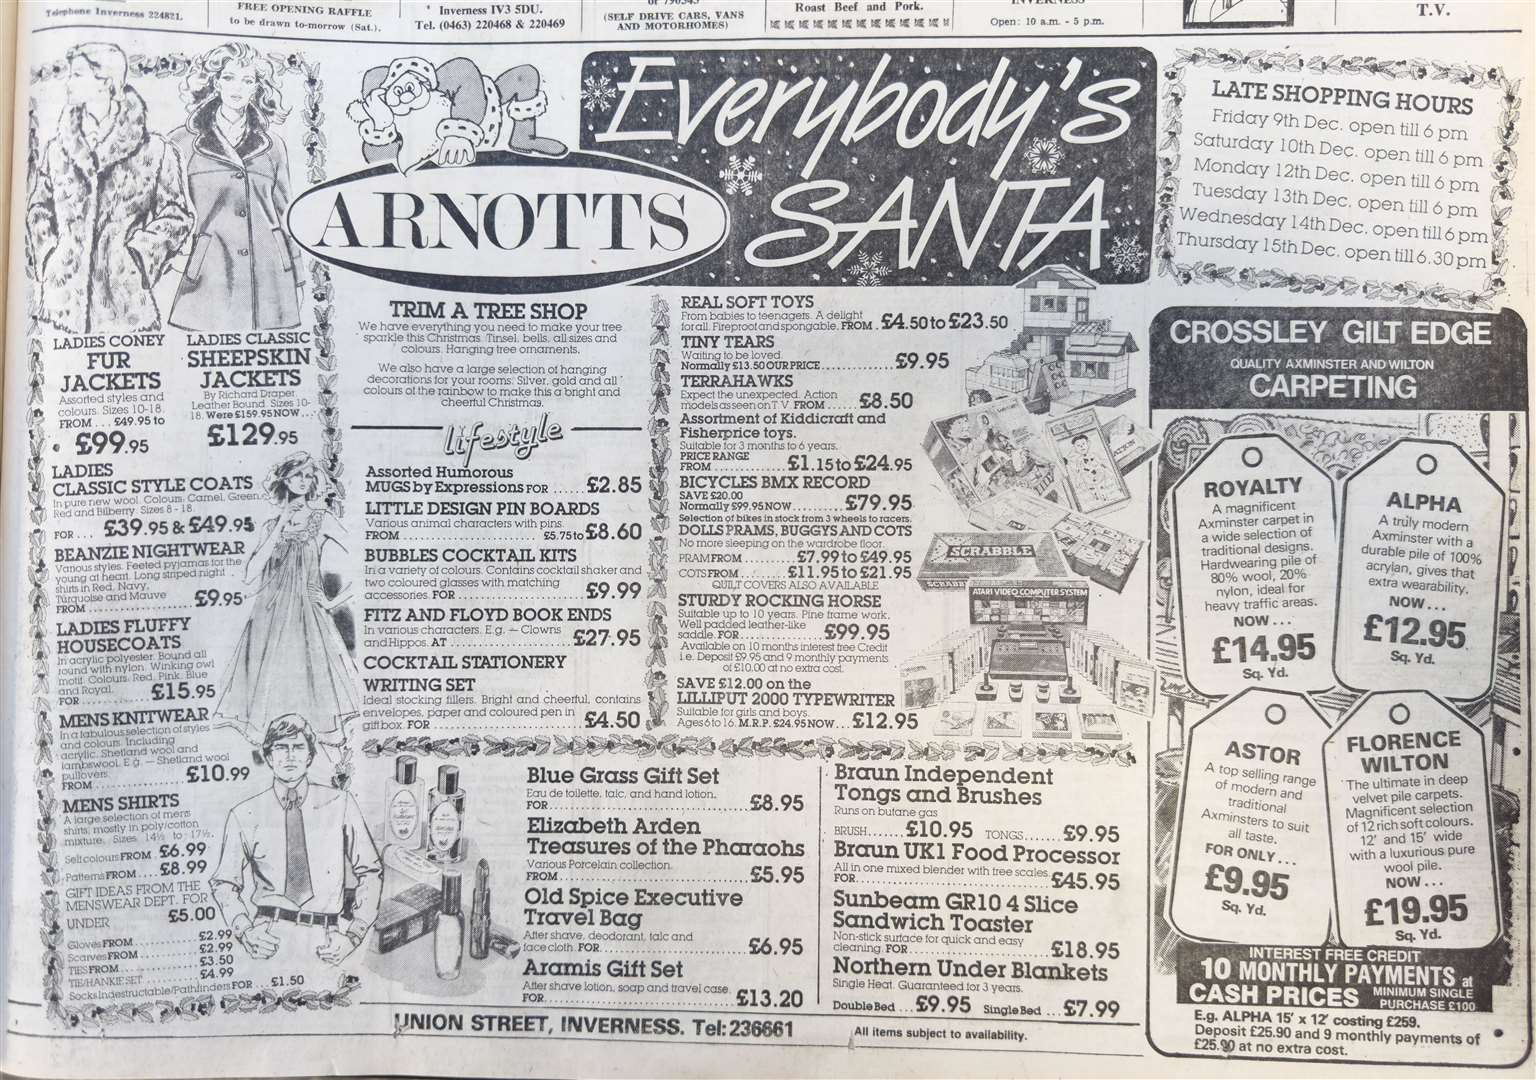 Arnotts department store, which closed in 2003, was the place to go Christmas shopping in 1983.